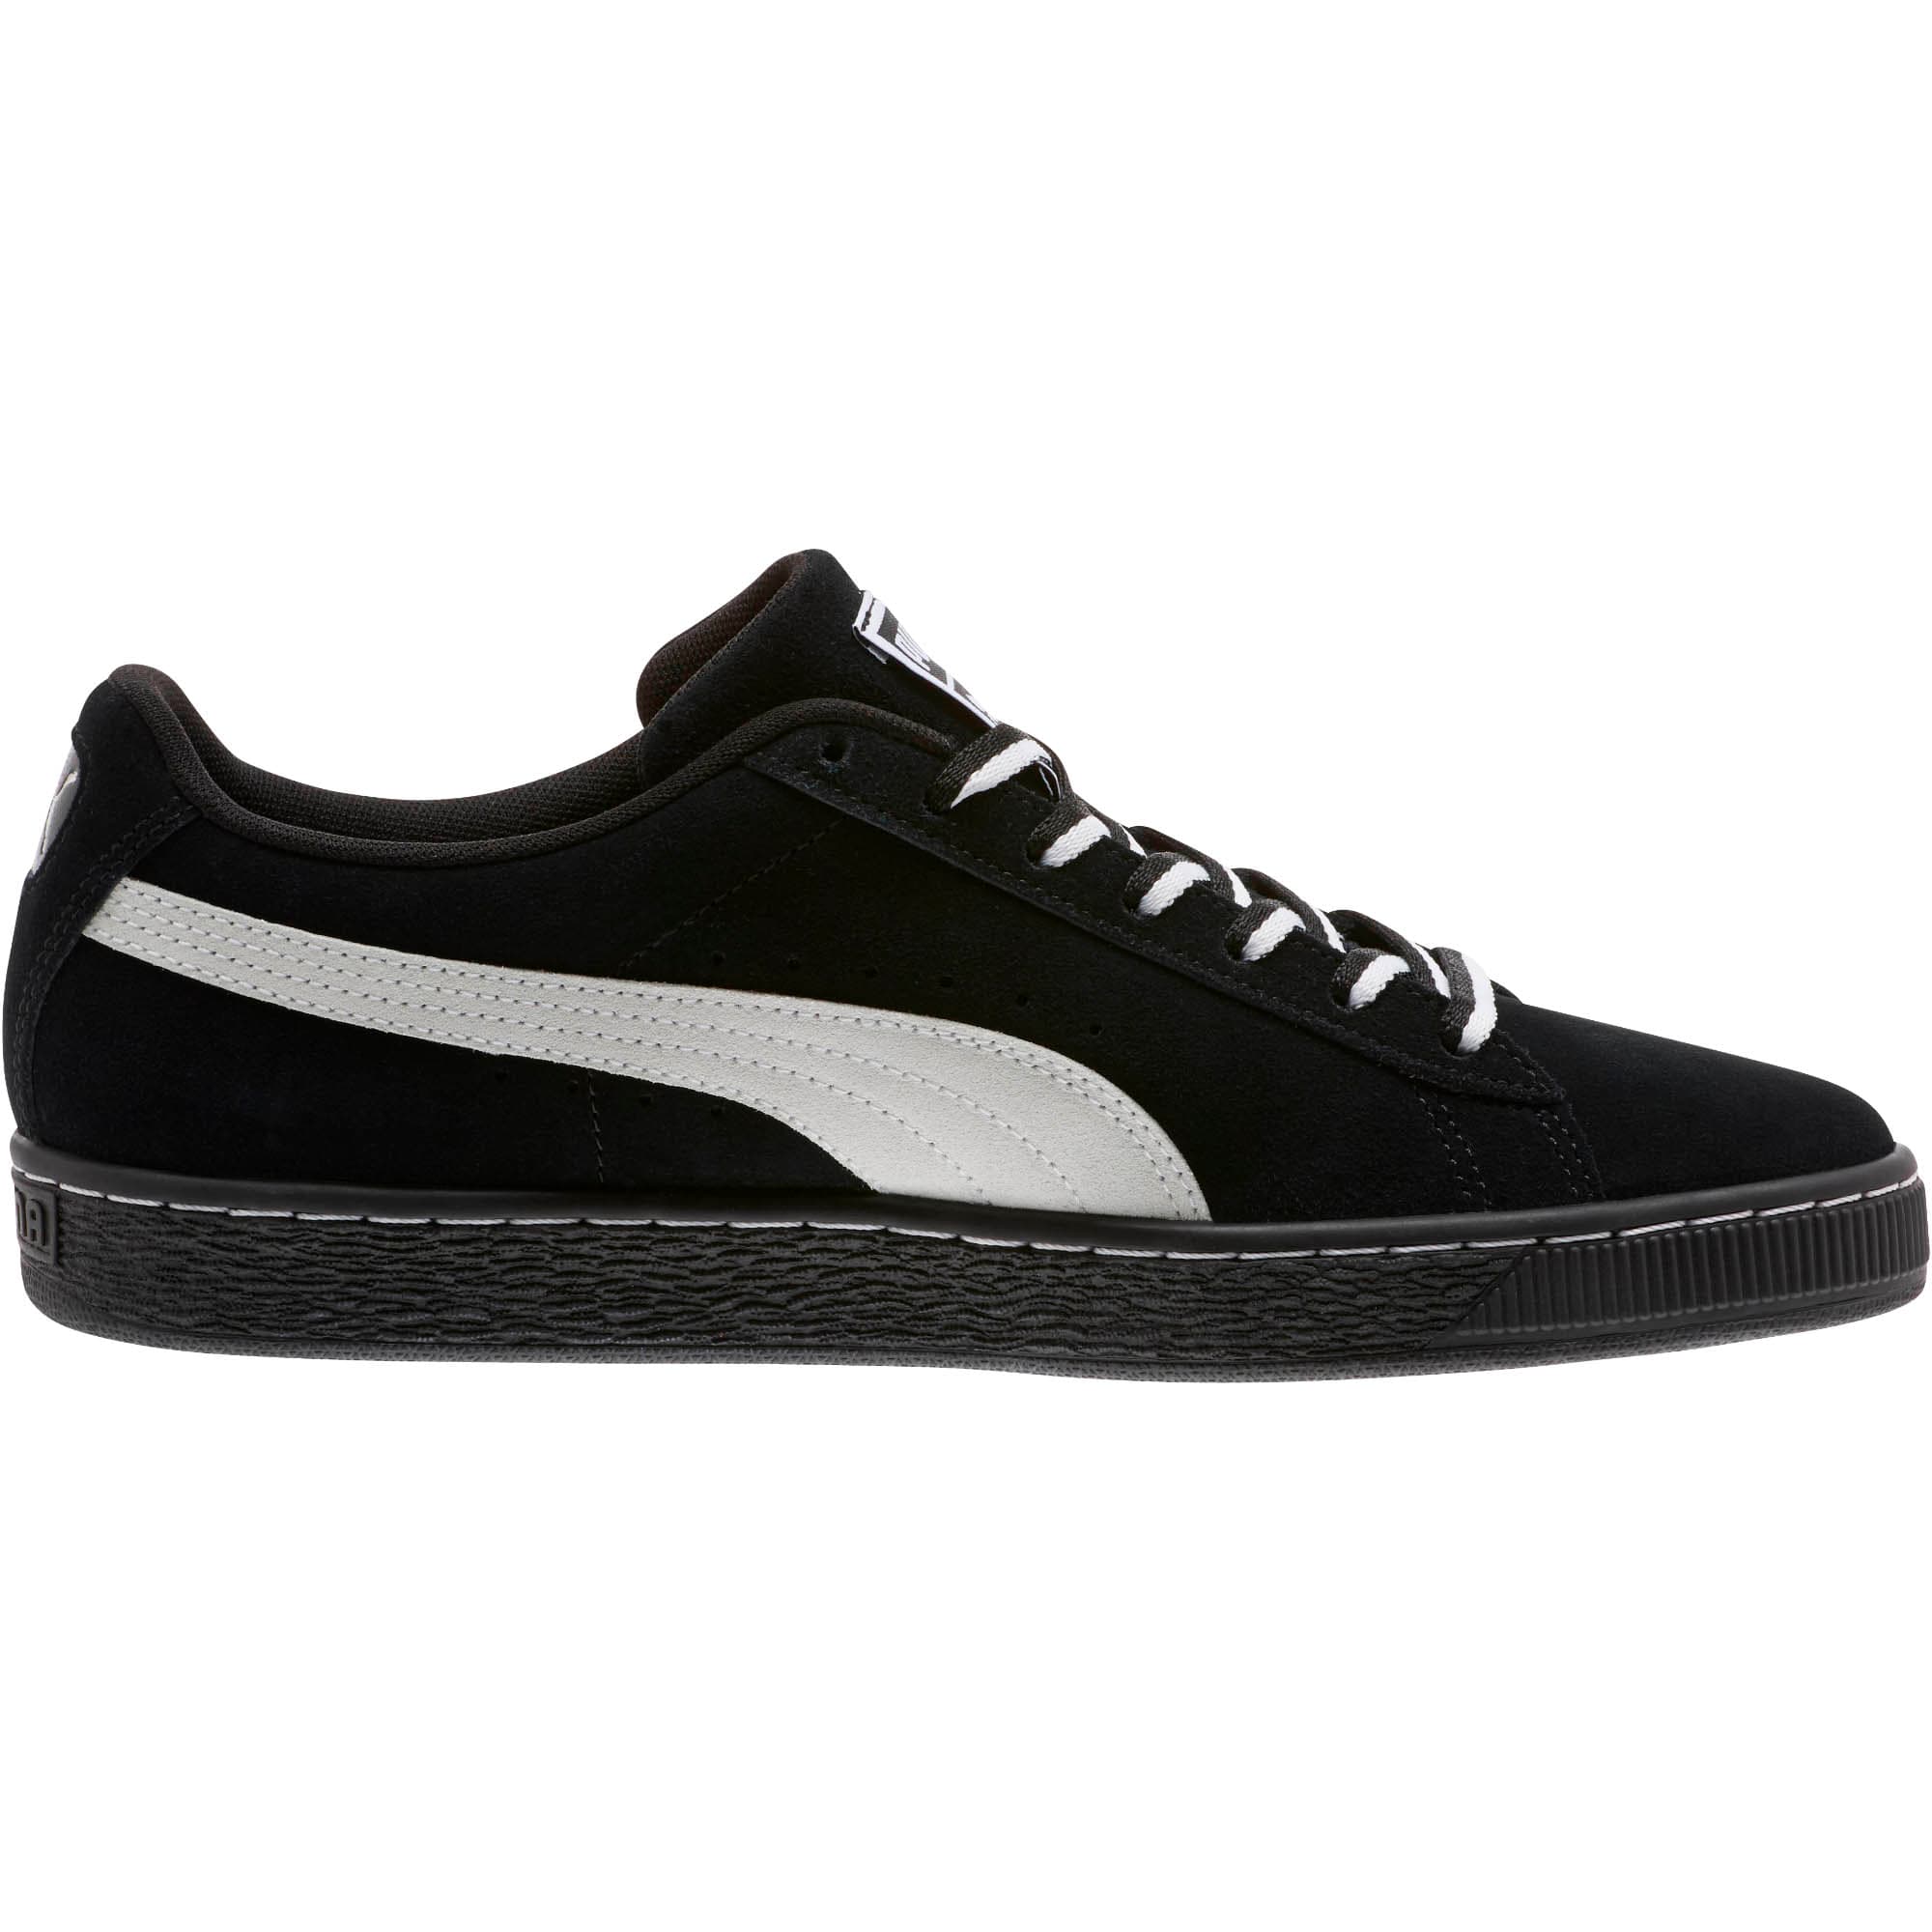 puma suede classic other side